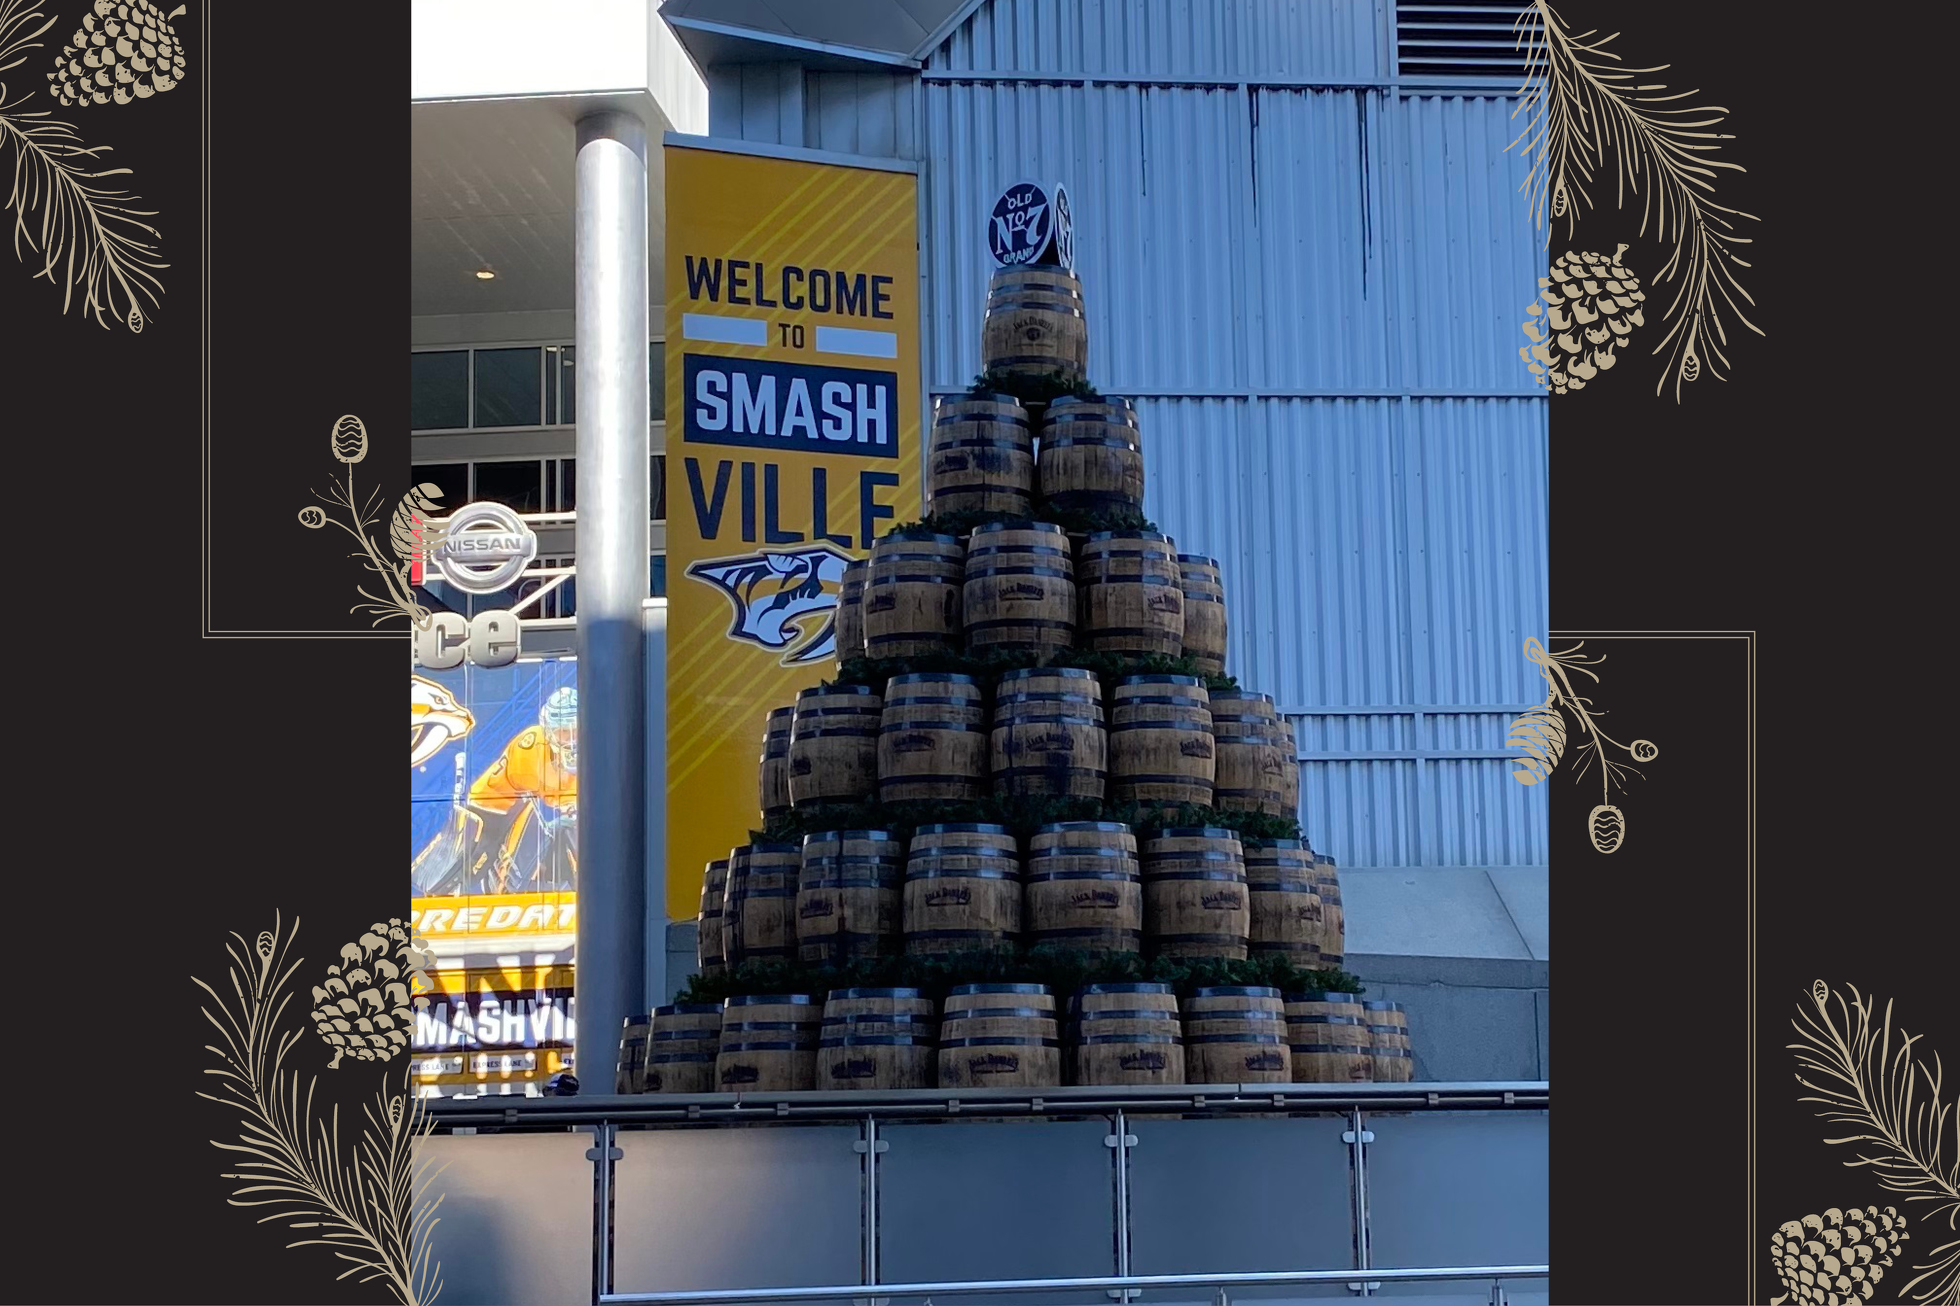 Top Barrel of the Holiday Tree from Nashville